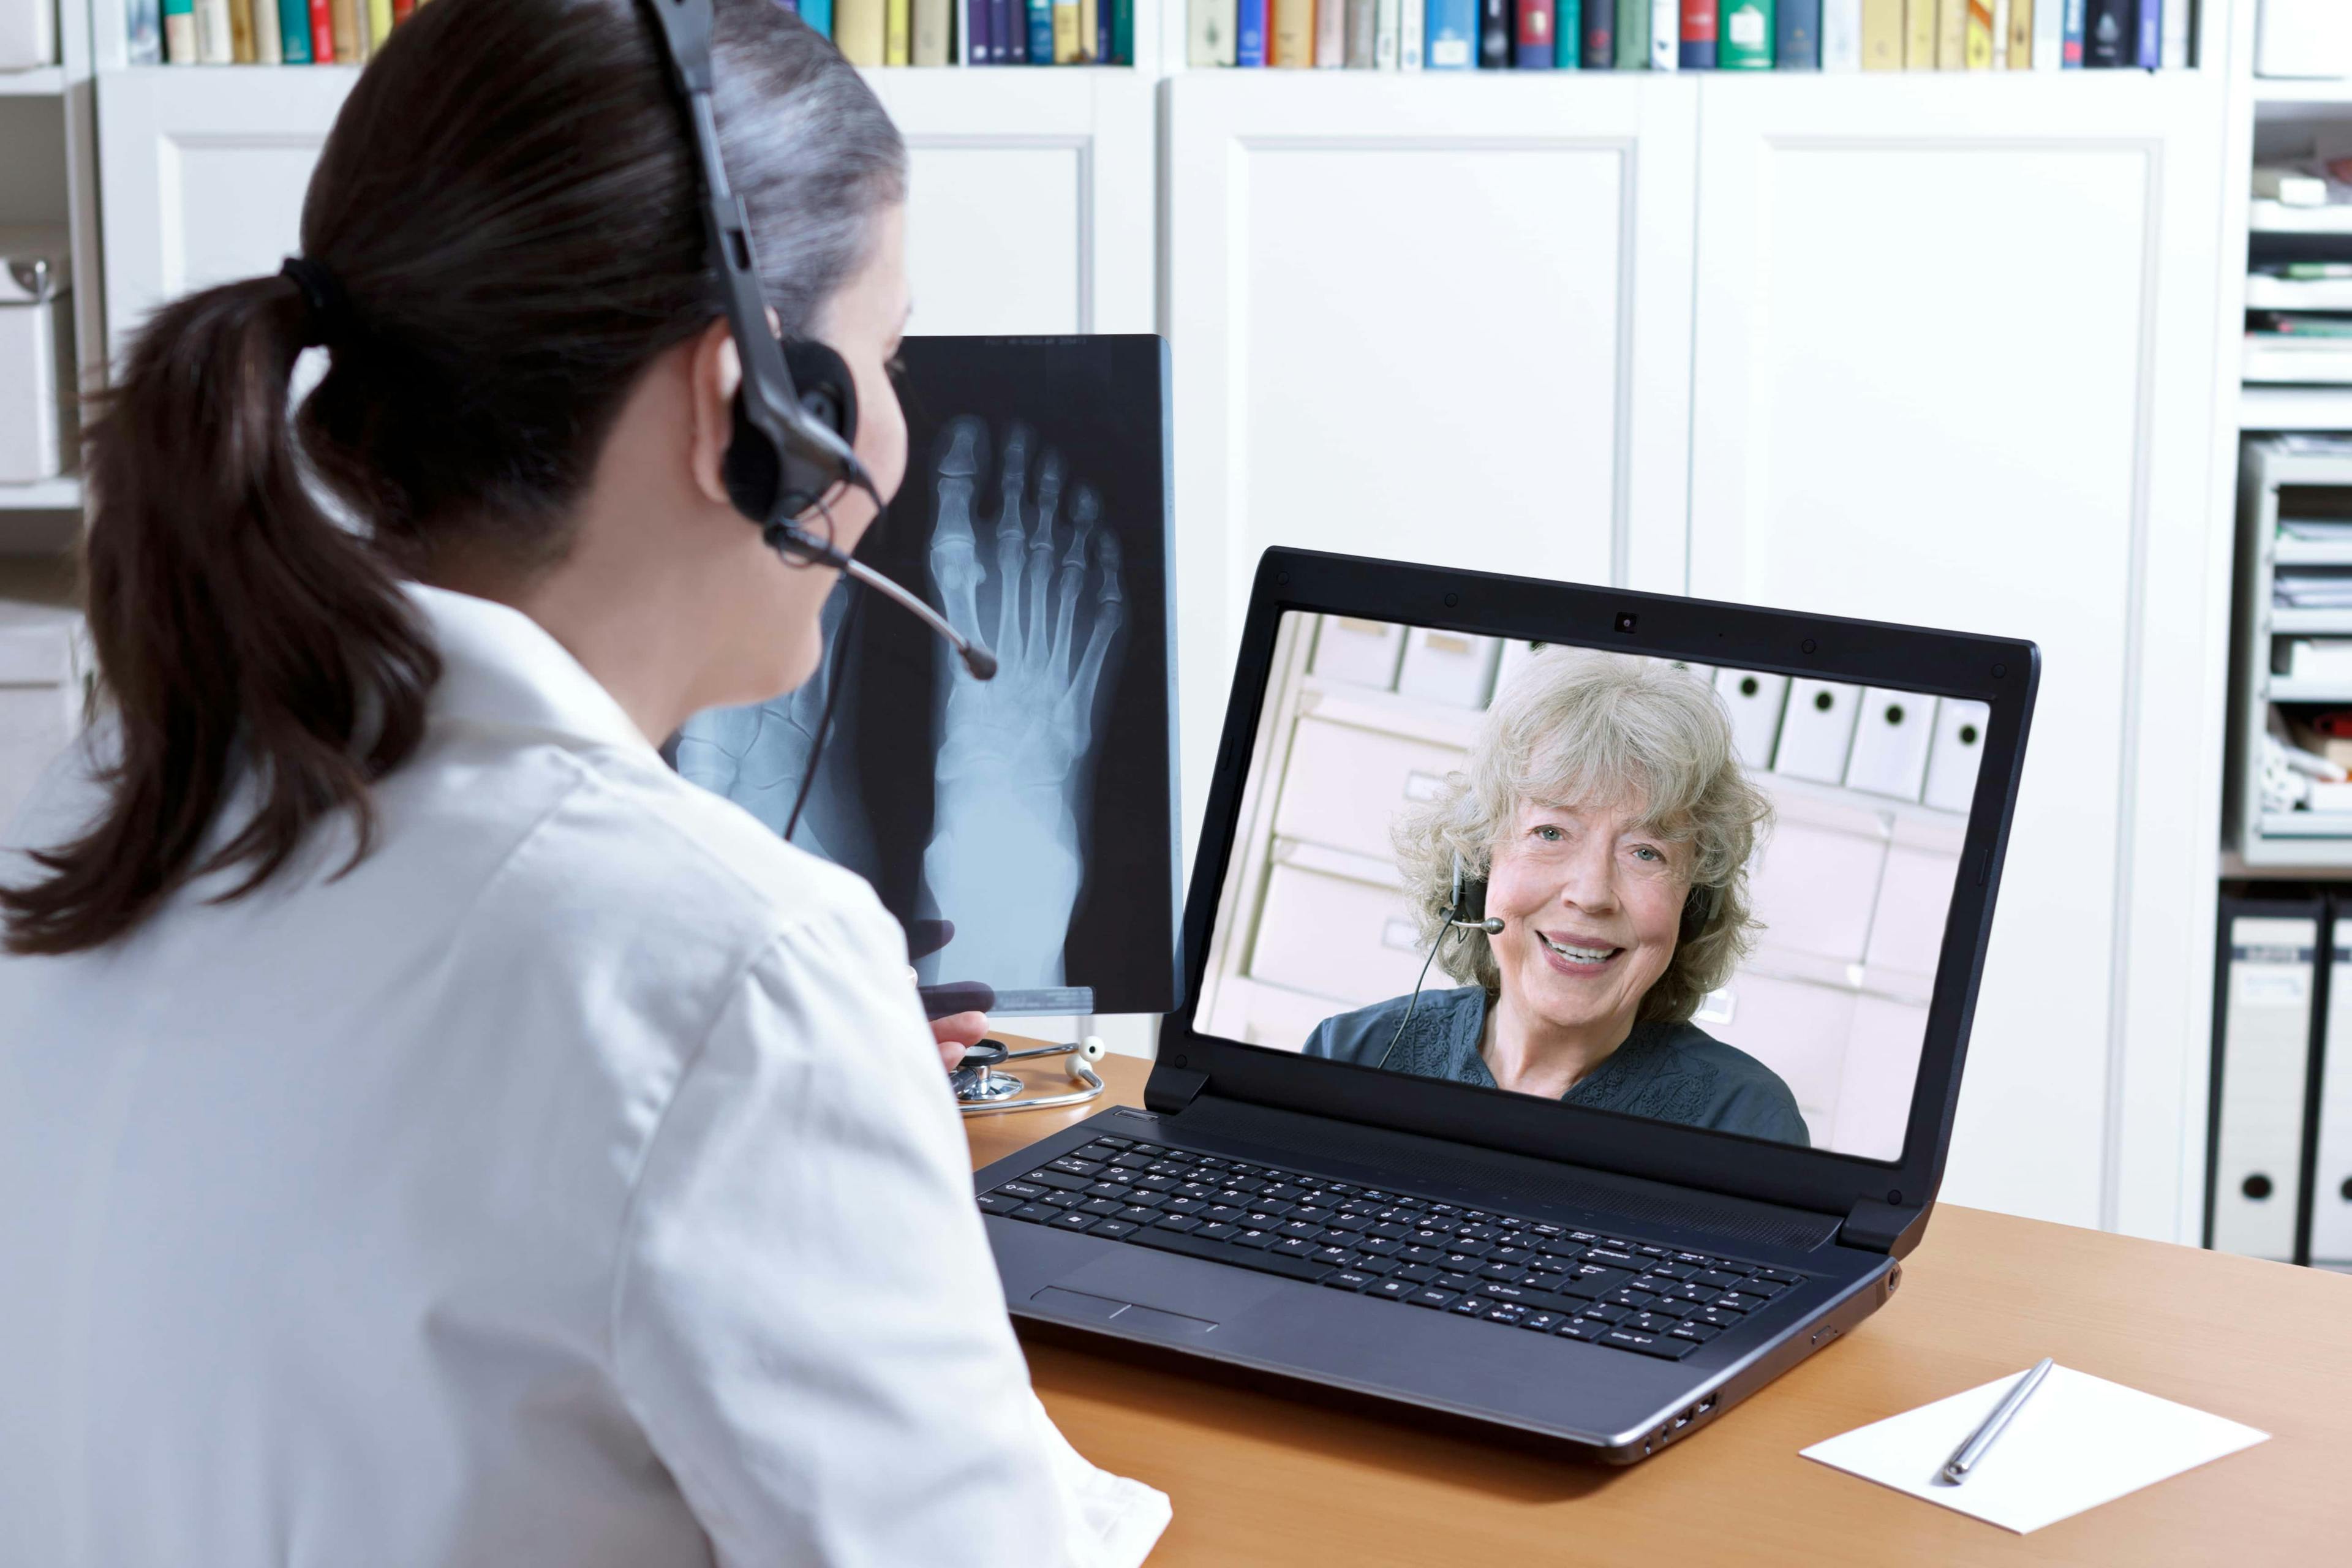 Image of a telemedicine appointment